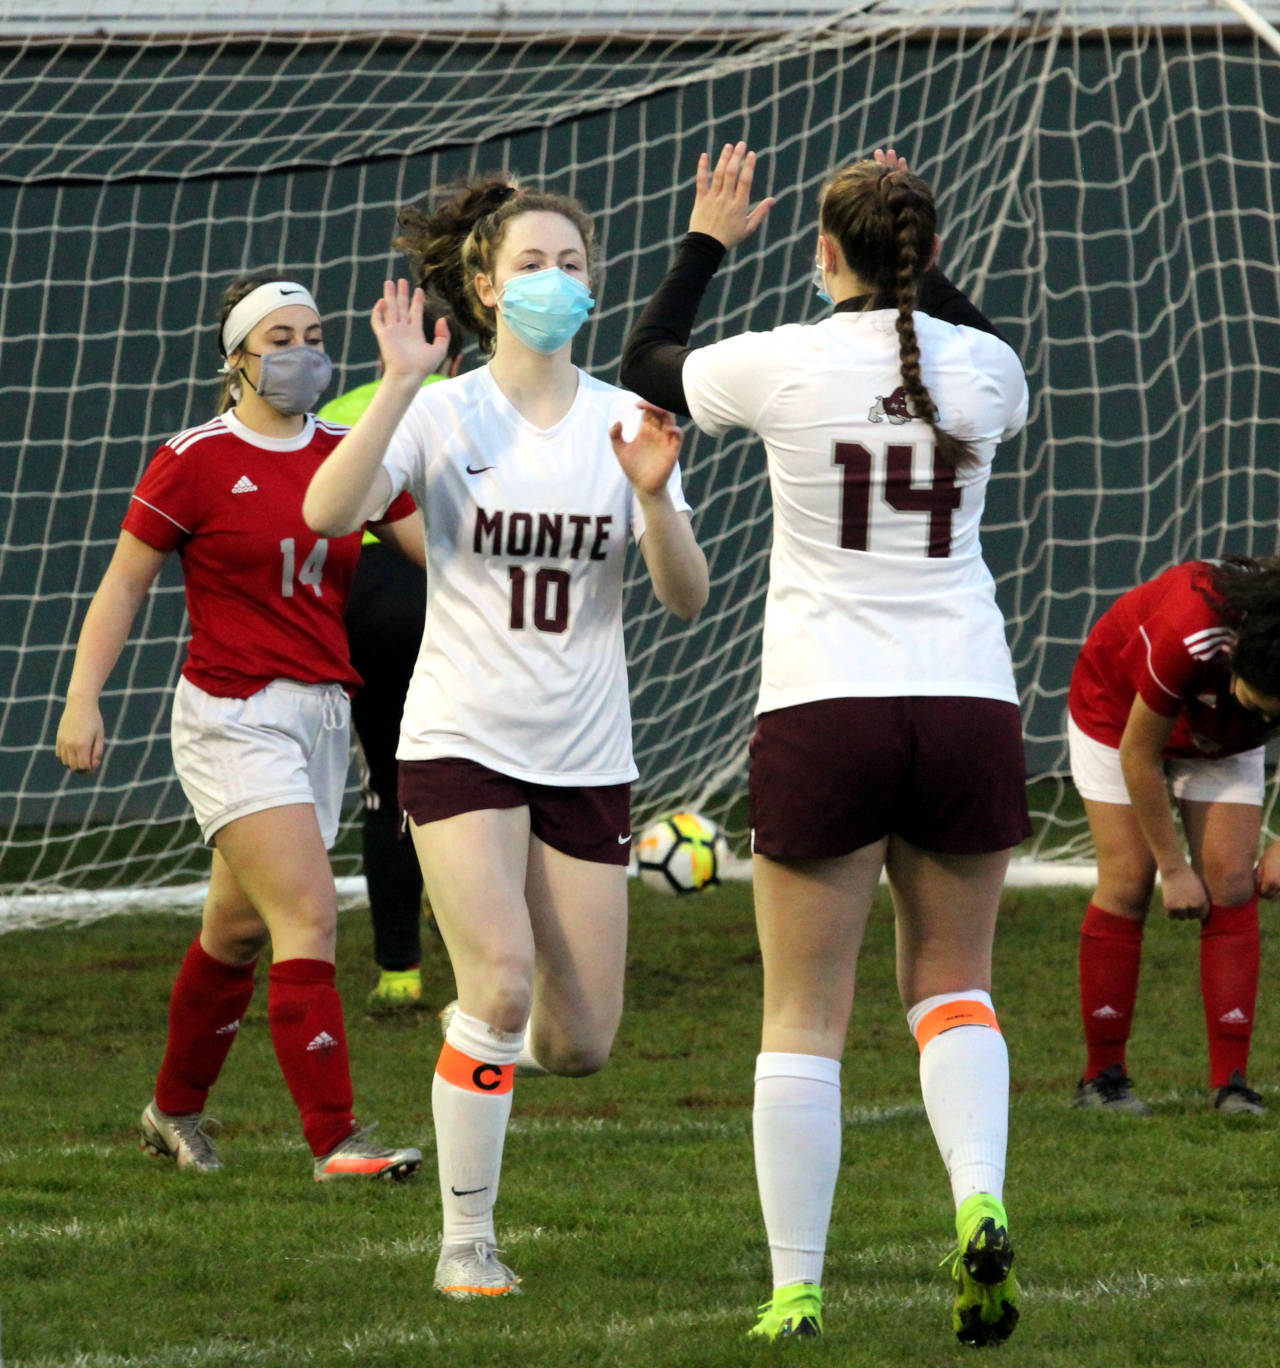 Montesano midfielder Brooke Streeter (10) is congratulated by teammate Cassadie Golding after scoring one of her two goals in a 4-0 win over Hoquiam on Thursday in Hoquiam. Streeter became a member of the 50/50 club with 50 goals and 54 assists for her prep career. (Photo by Ben Winkelman)